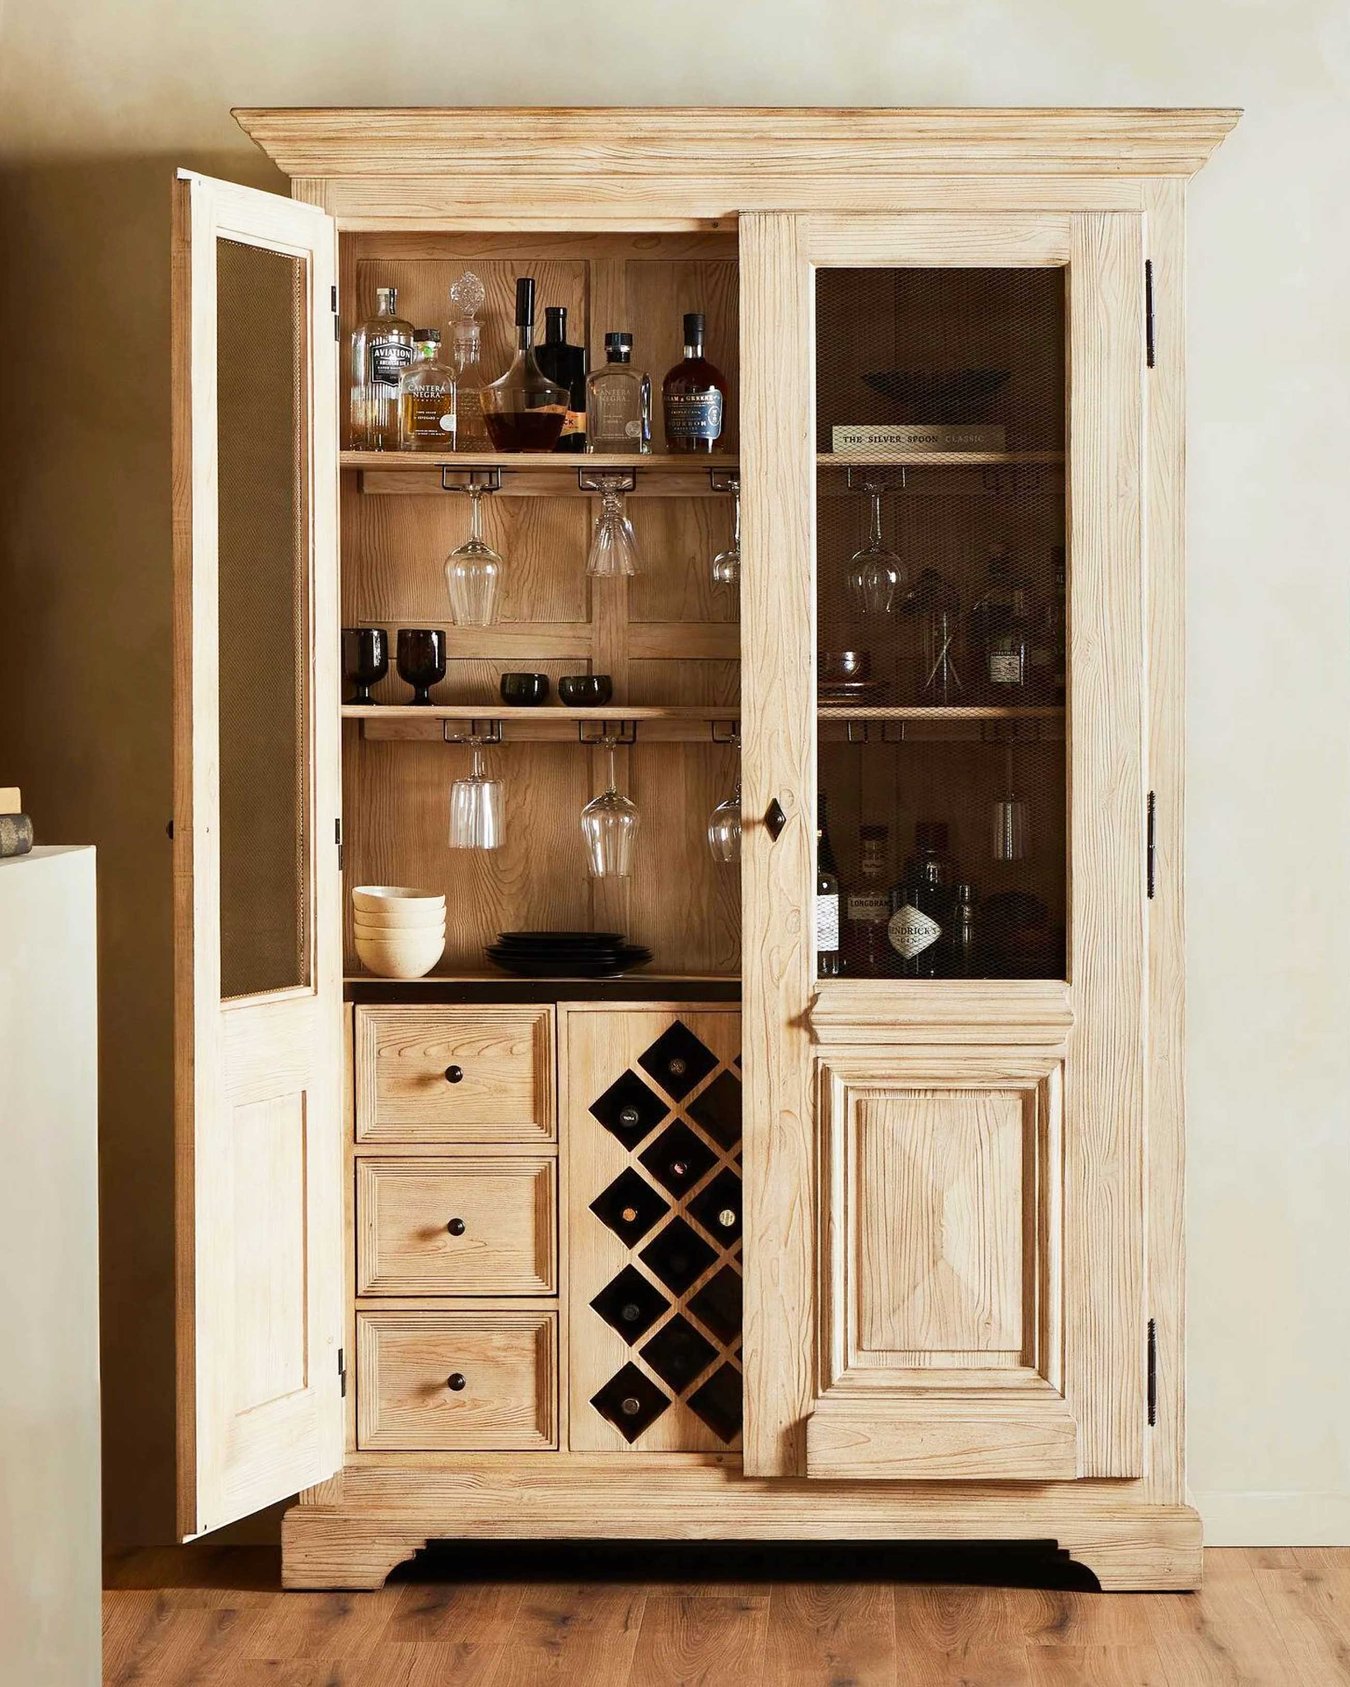 A light wood traditional cabinet with drinking glasses and bottles.